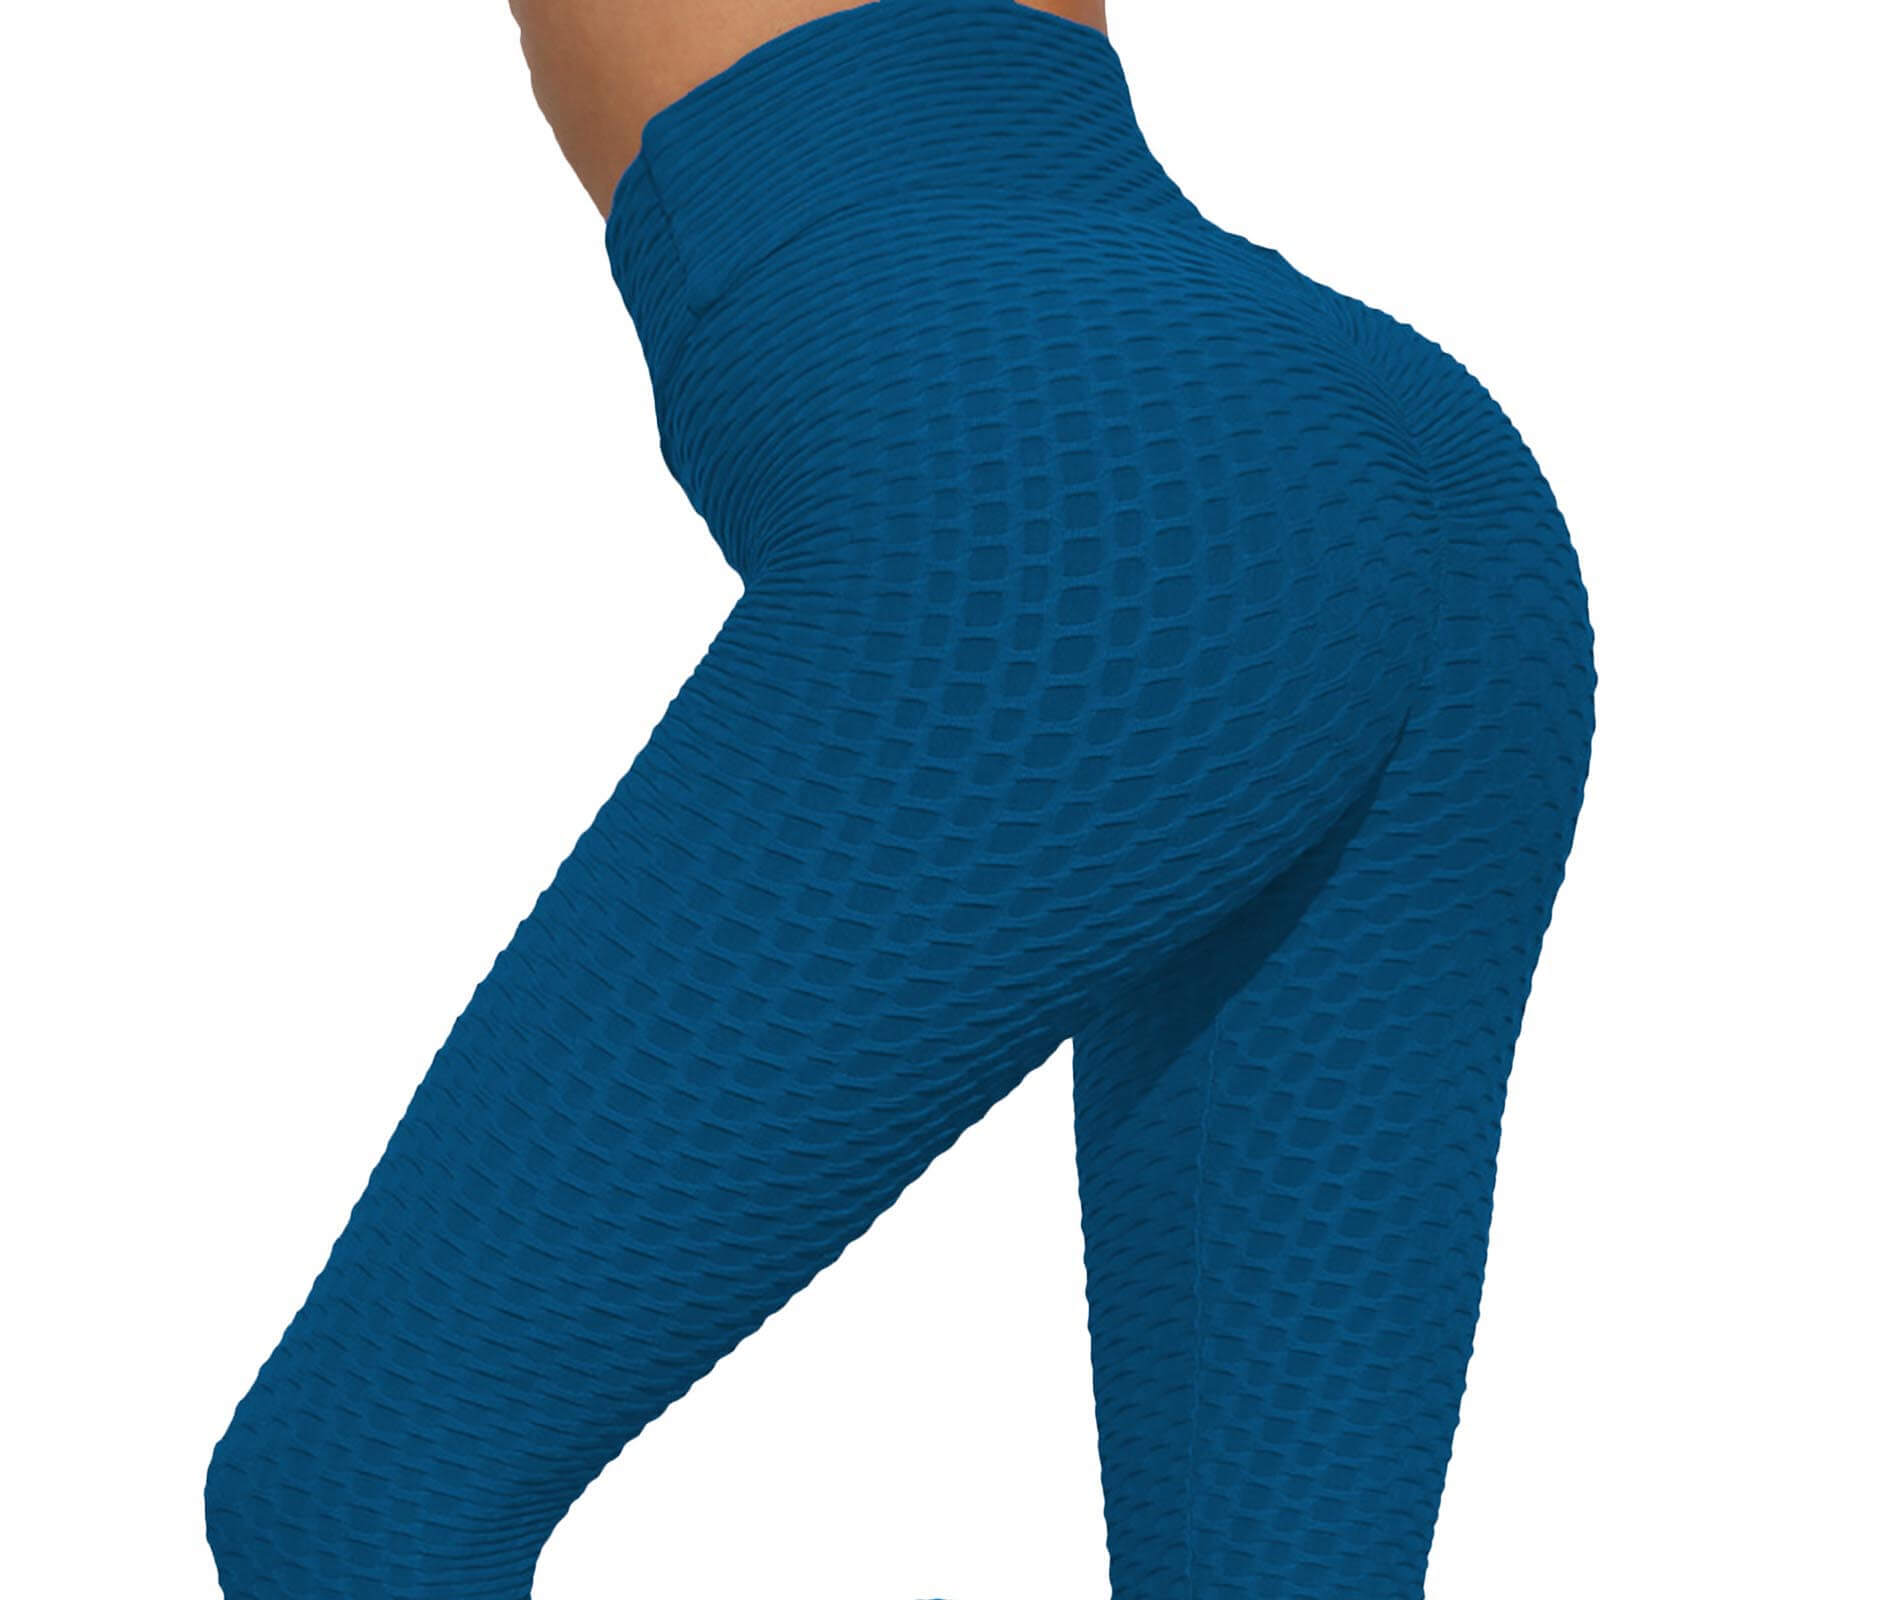  Women's Scrunch Booty Butt Lifting Leggings Honeycomb Textured Workout Tights High Waist Ruched Yoga Pants